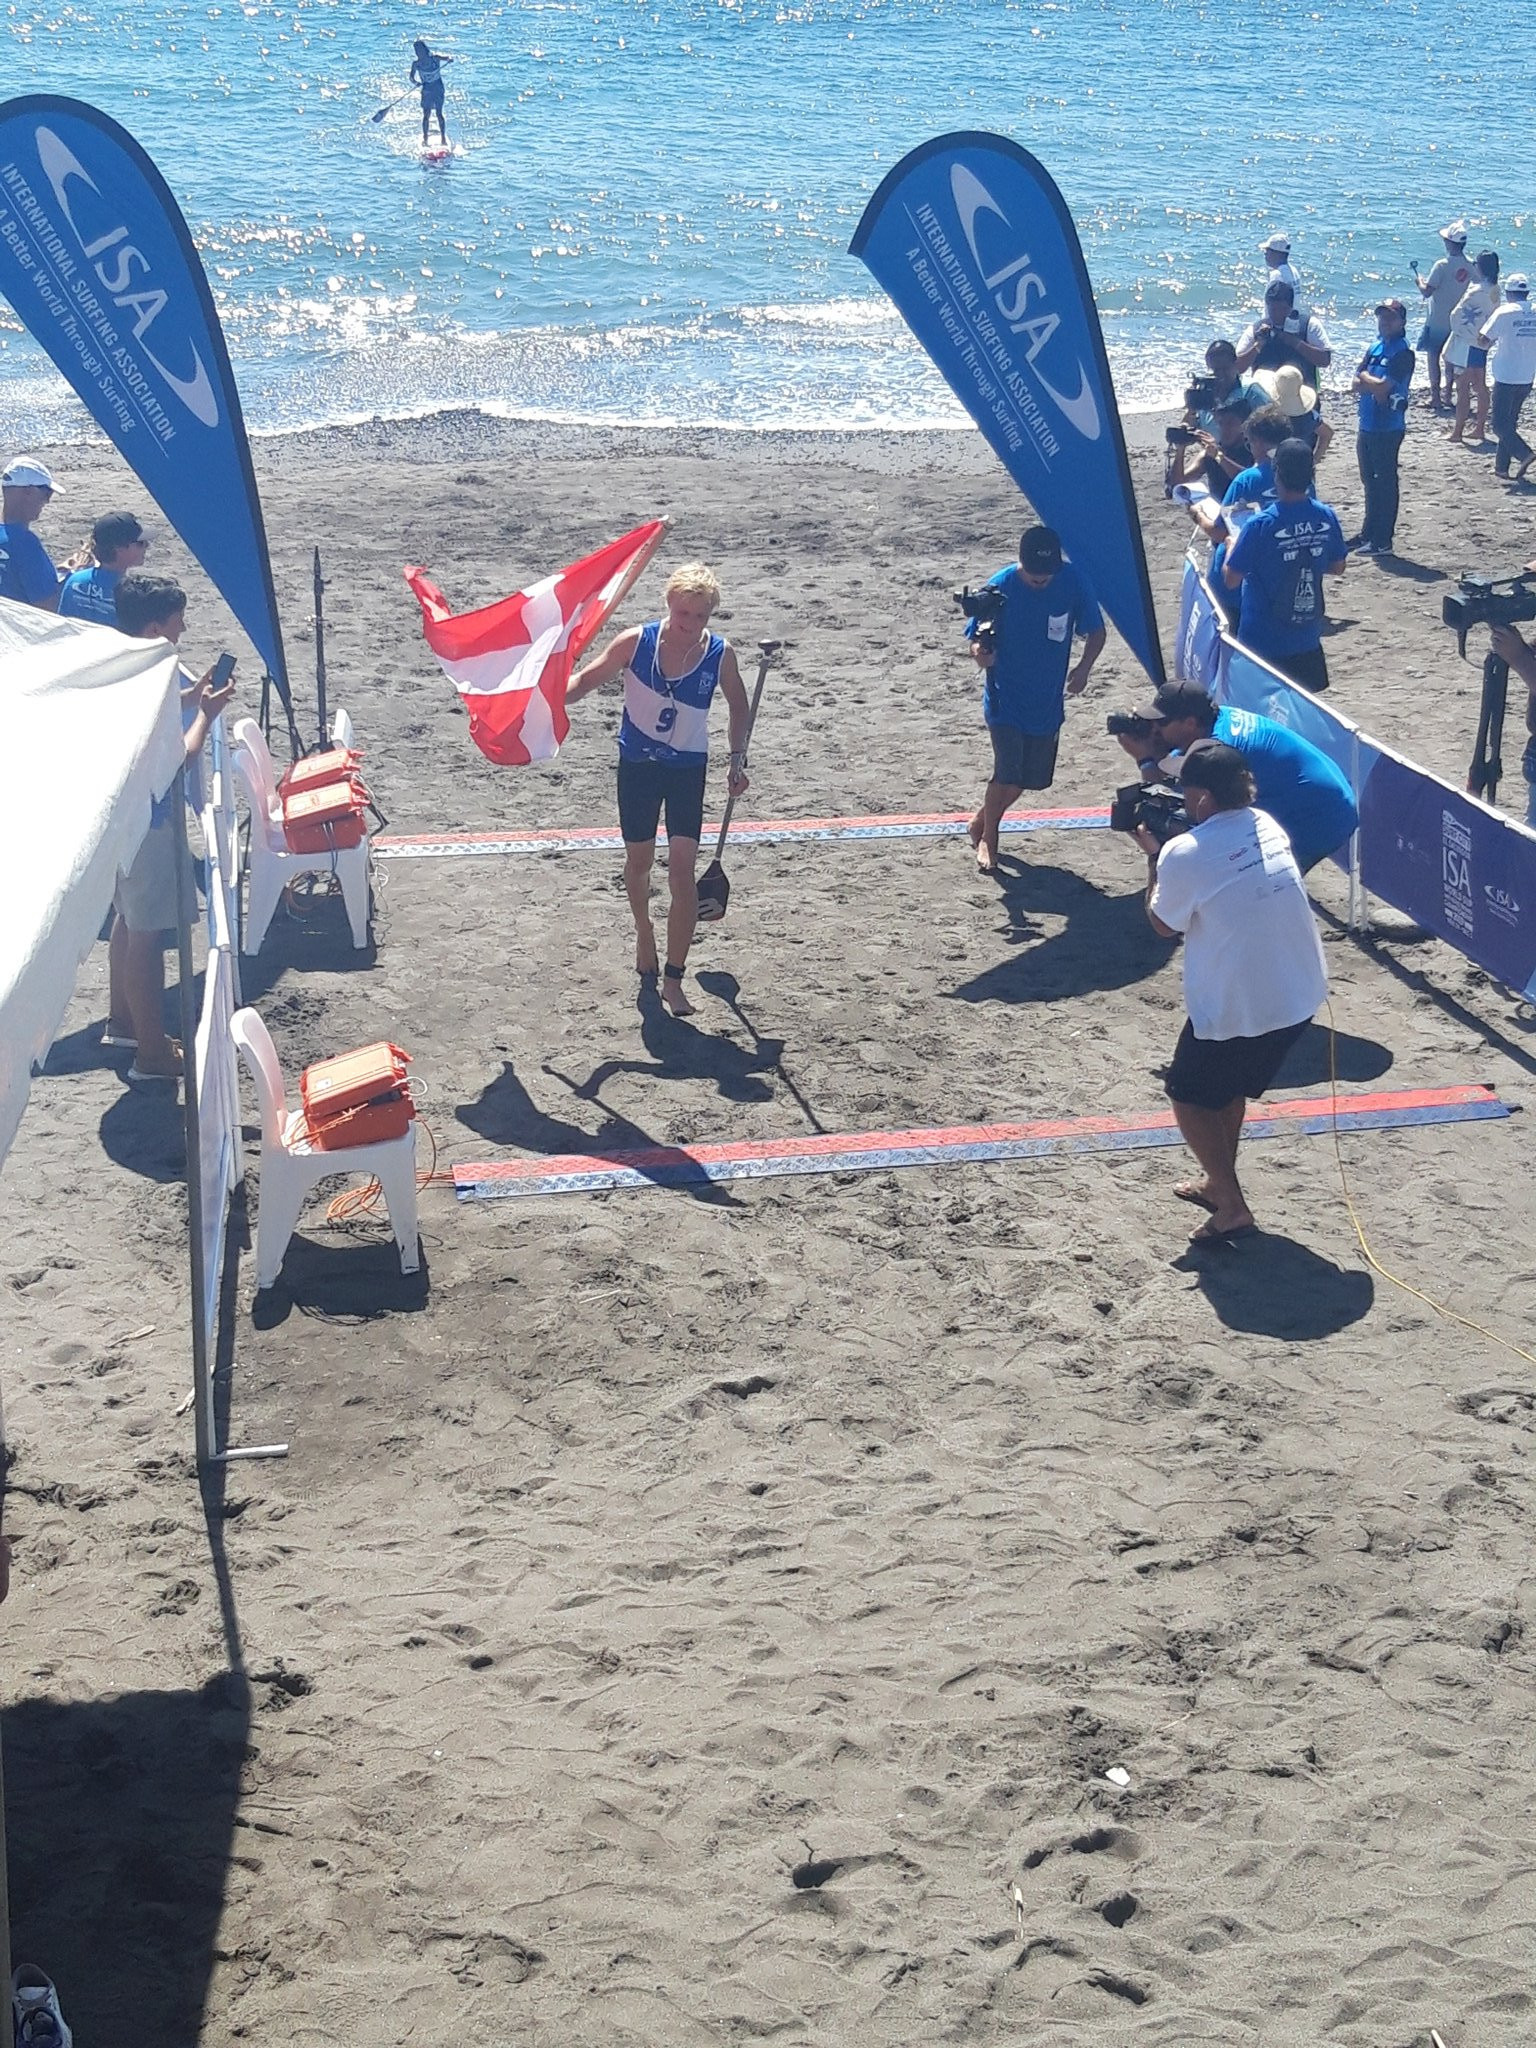 Christian Andersen of Denmark crosses the line to win the men's junior SUP technical final ©ITG 